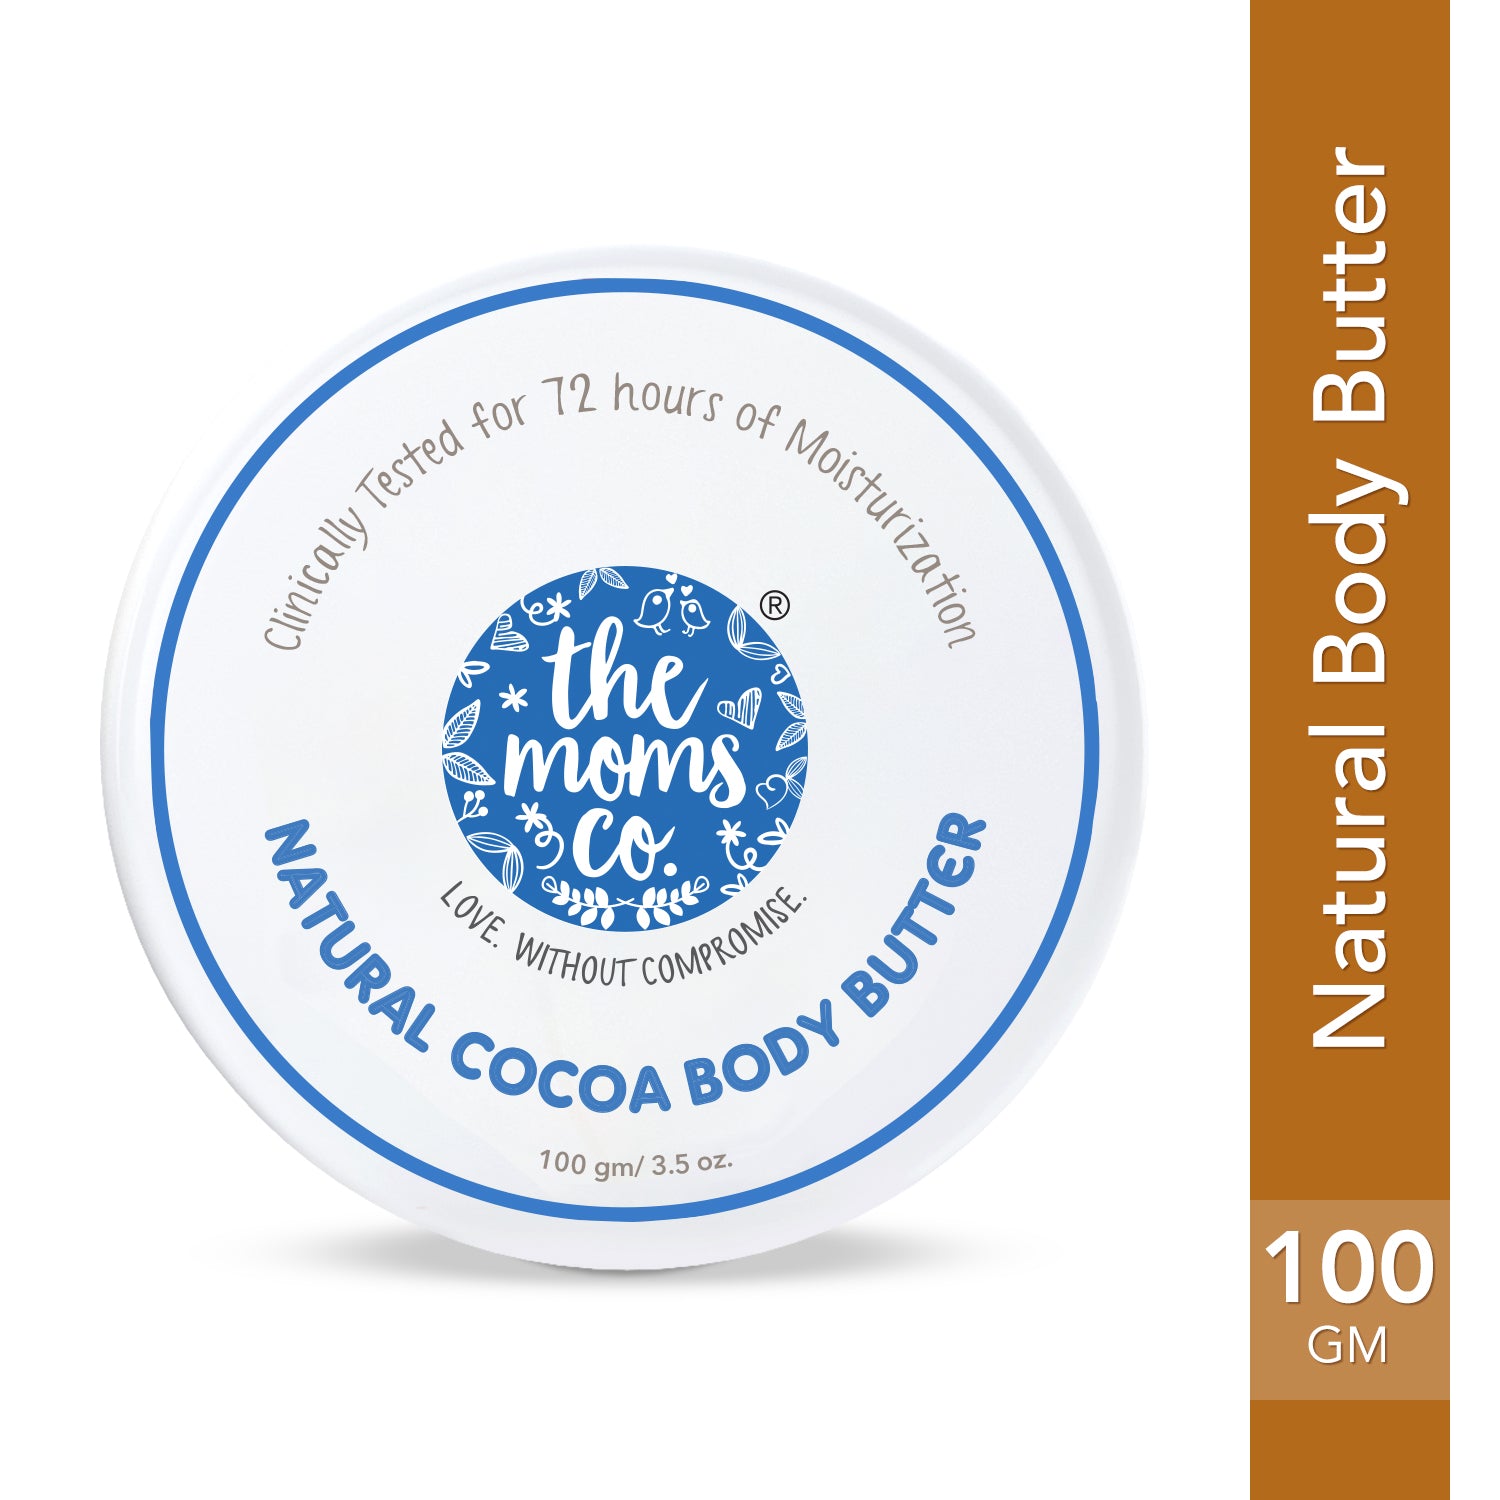 The Moms Co. Natural Cocoa Body Butter - The Ideal Moisturizer for Dry Skin |Moisturizes & Nourishes Skin | With Shea & Cocoa Butters-100 Gm